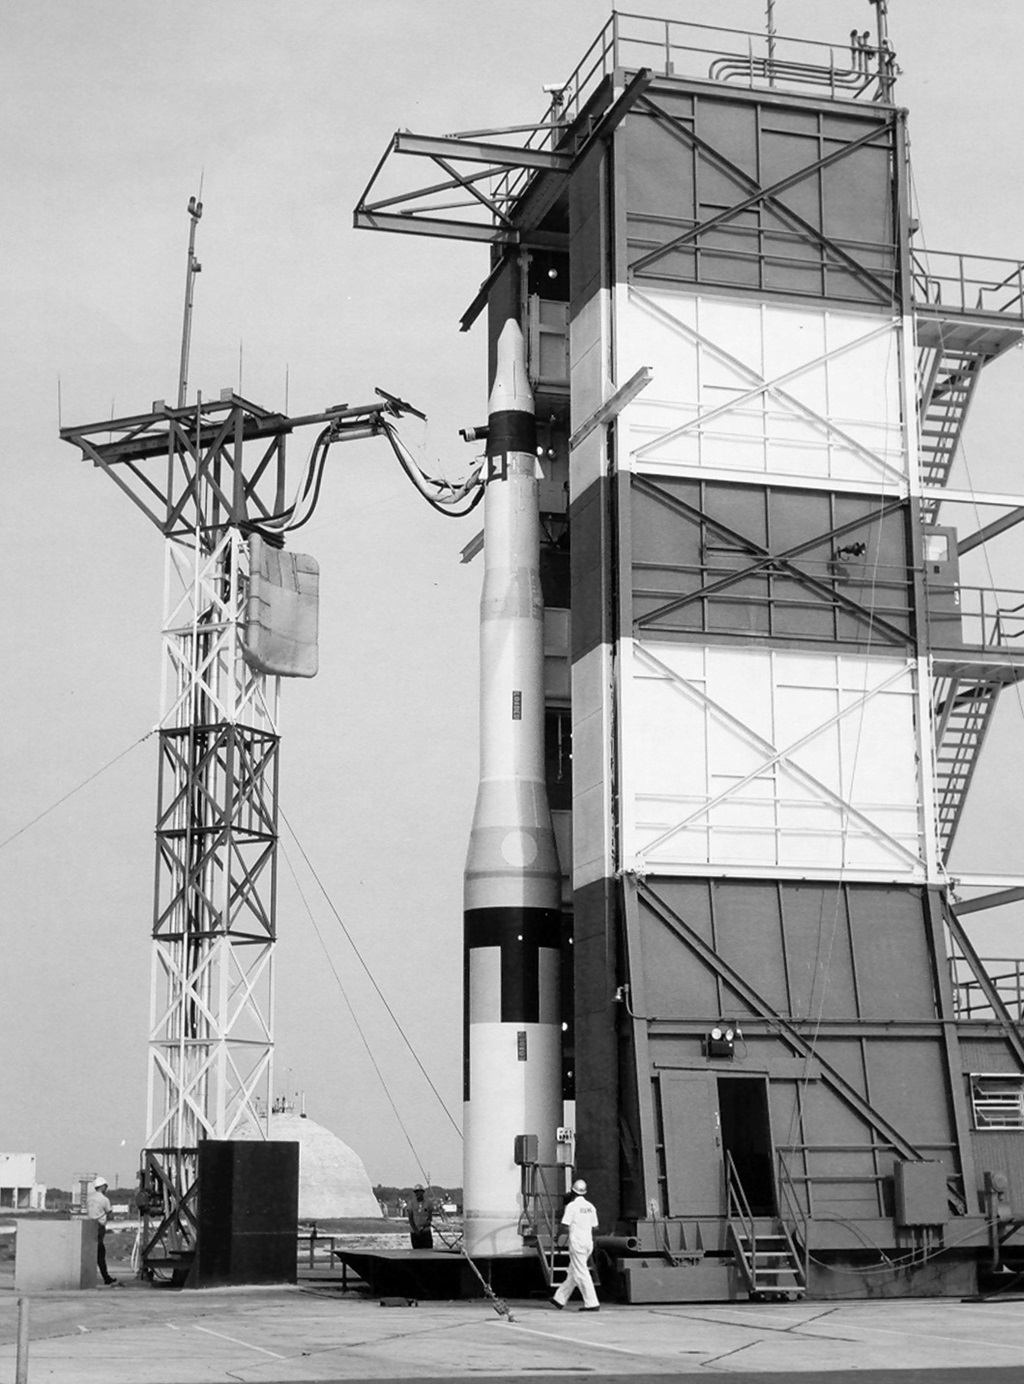 Rocket on launch pad with man in front